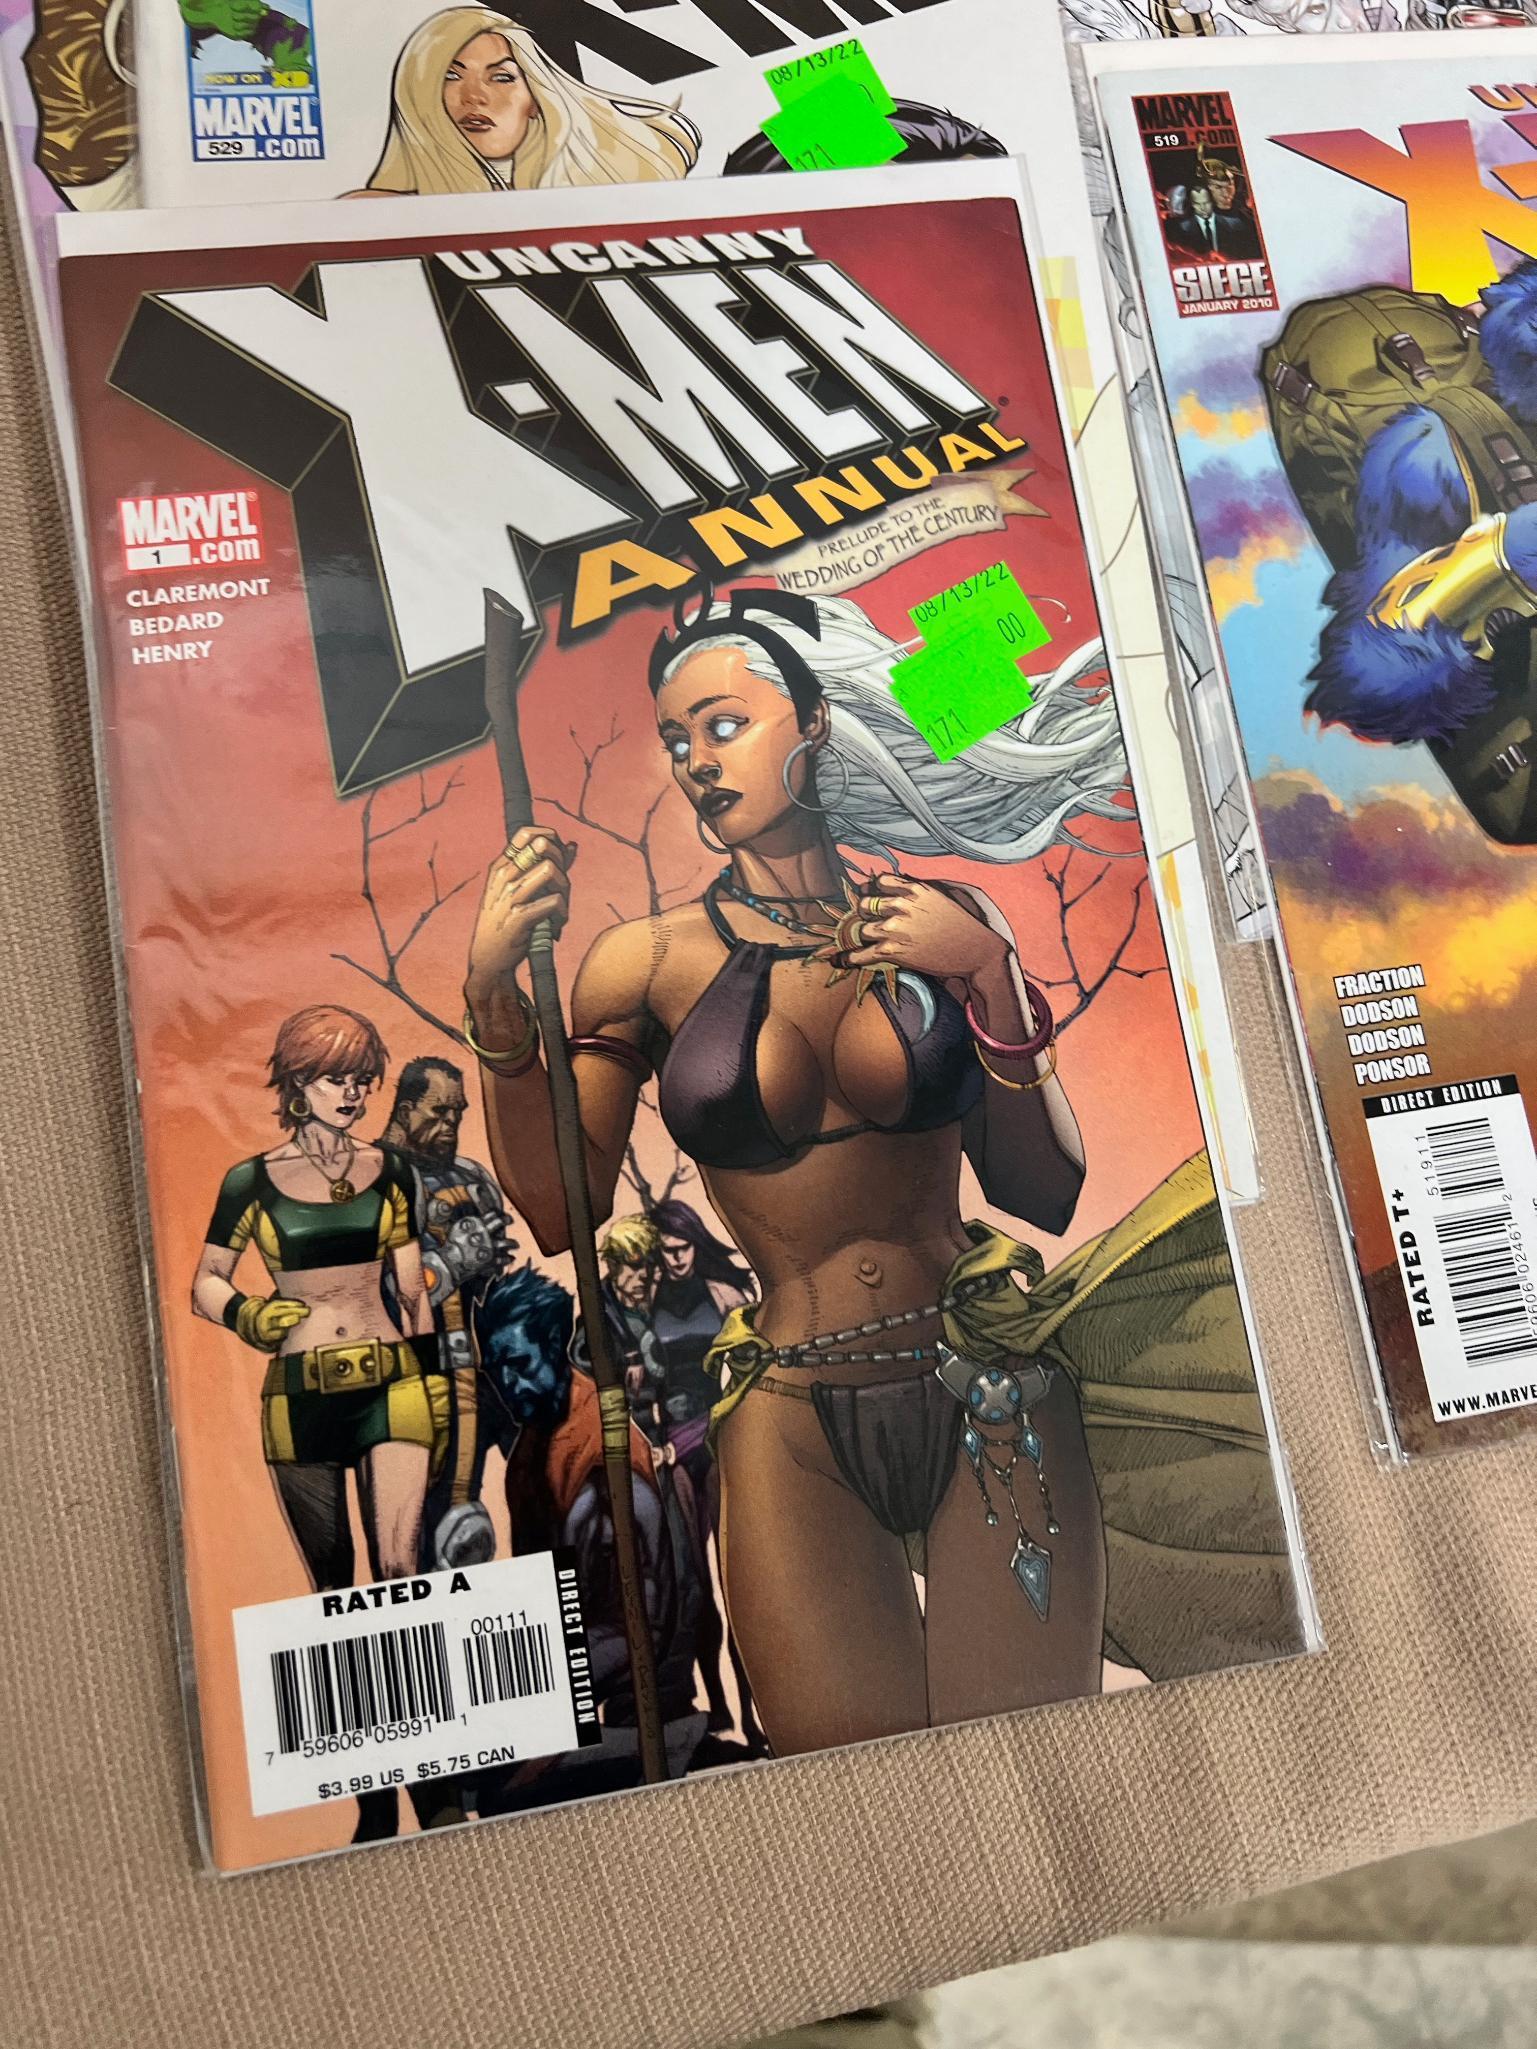 20+ Uncanny X-Men and related Comic Books issues 502-527, some dups, some gaps, see pics